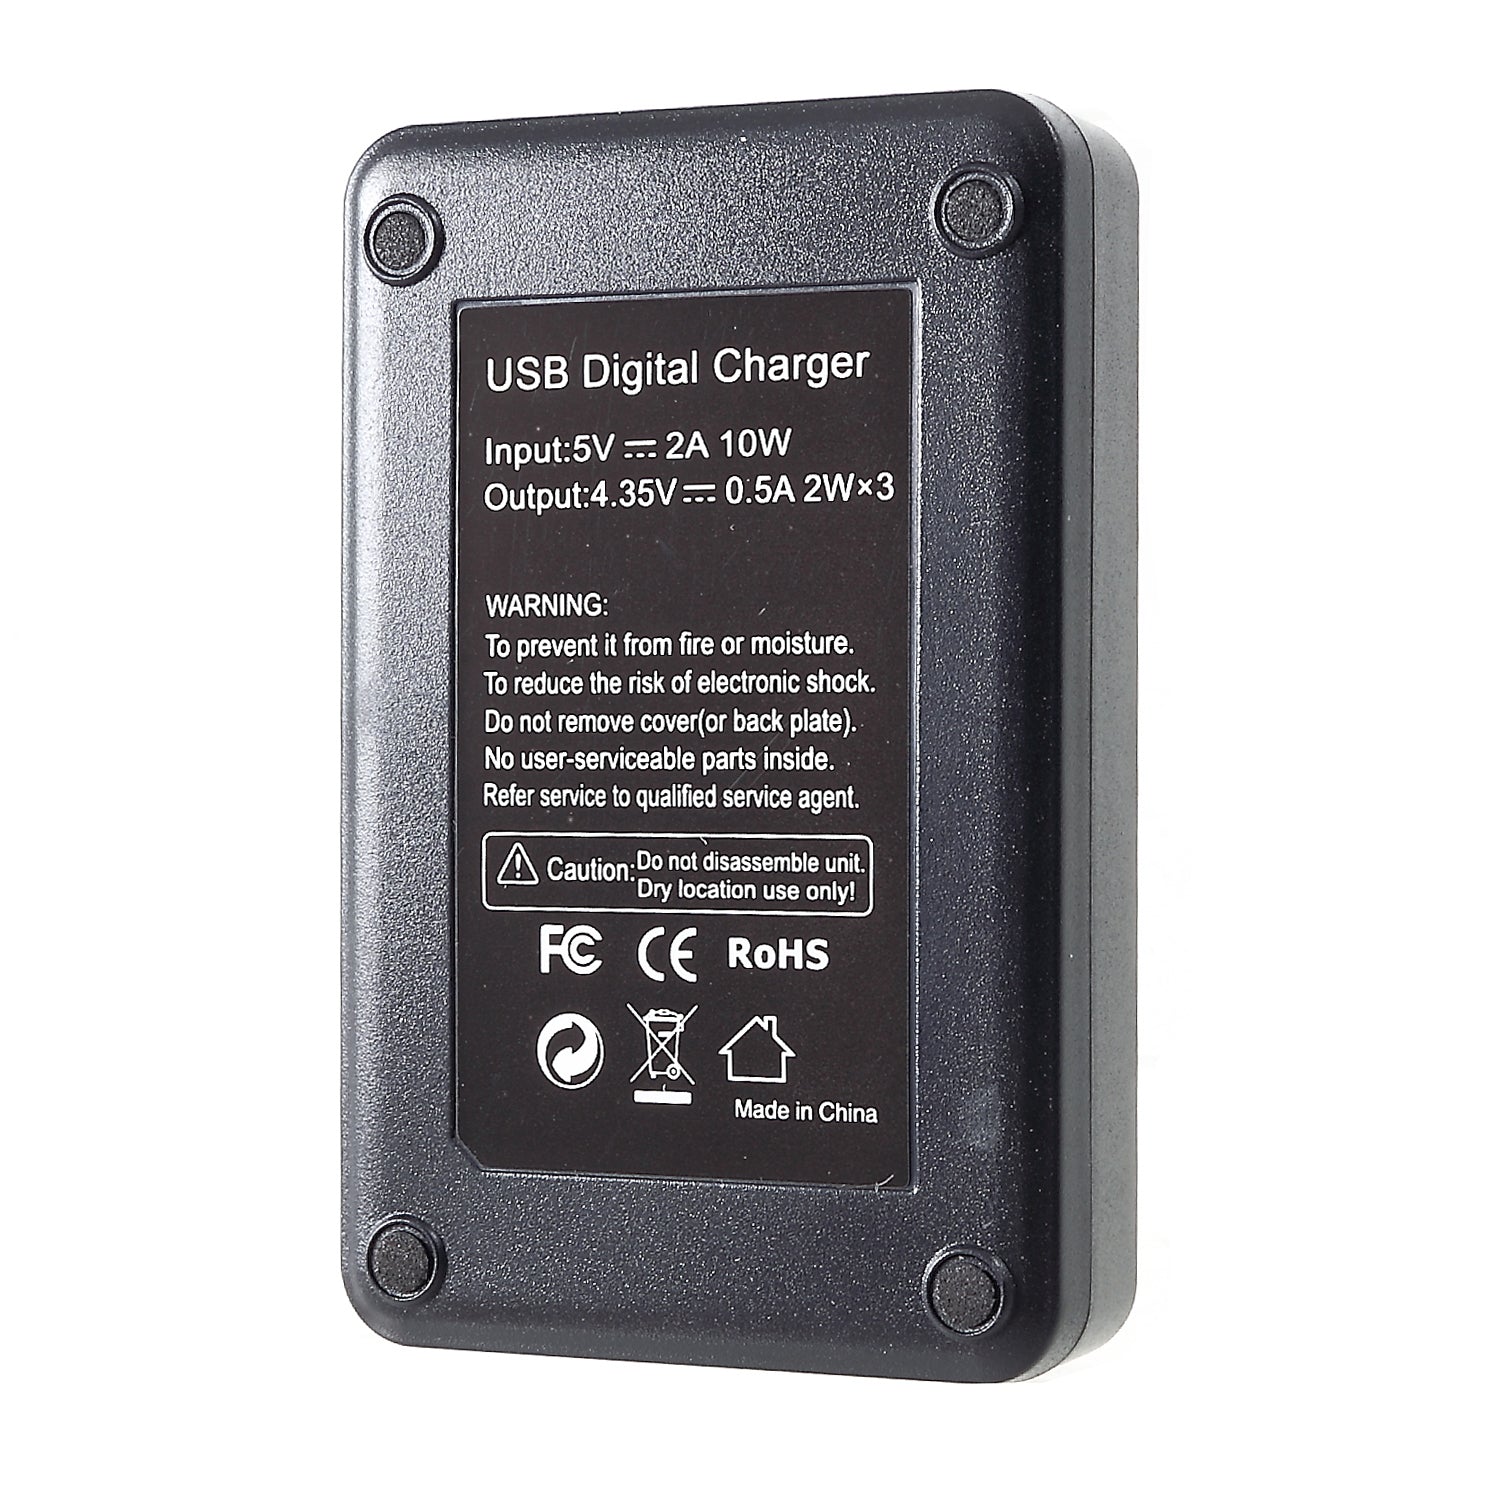 AT-M29 [3 Channel] Battery Charger for Mijia Camera with [LCD Display]